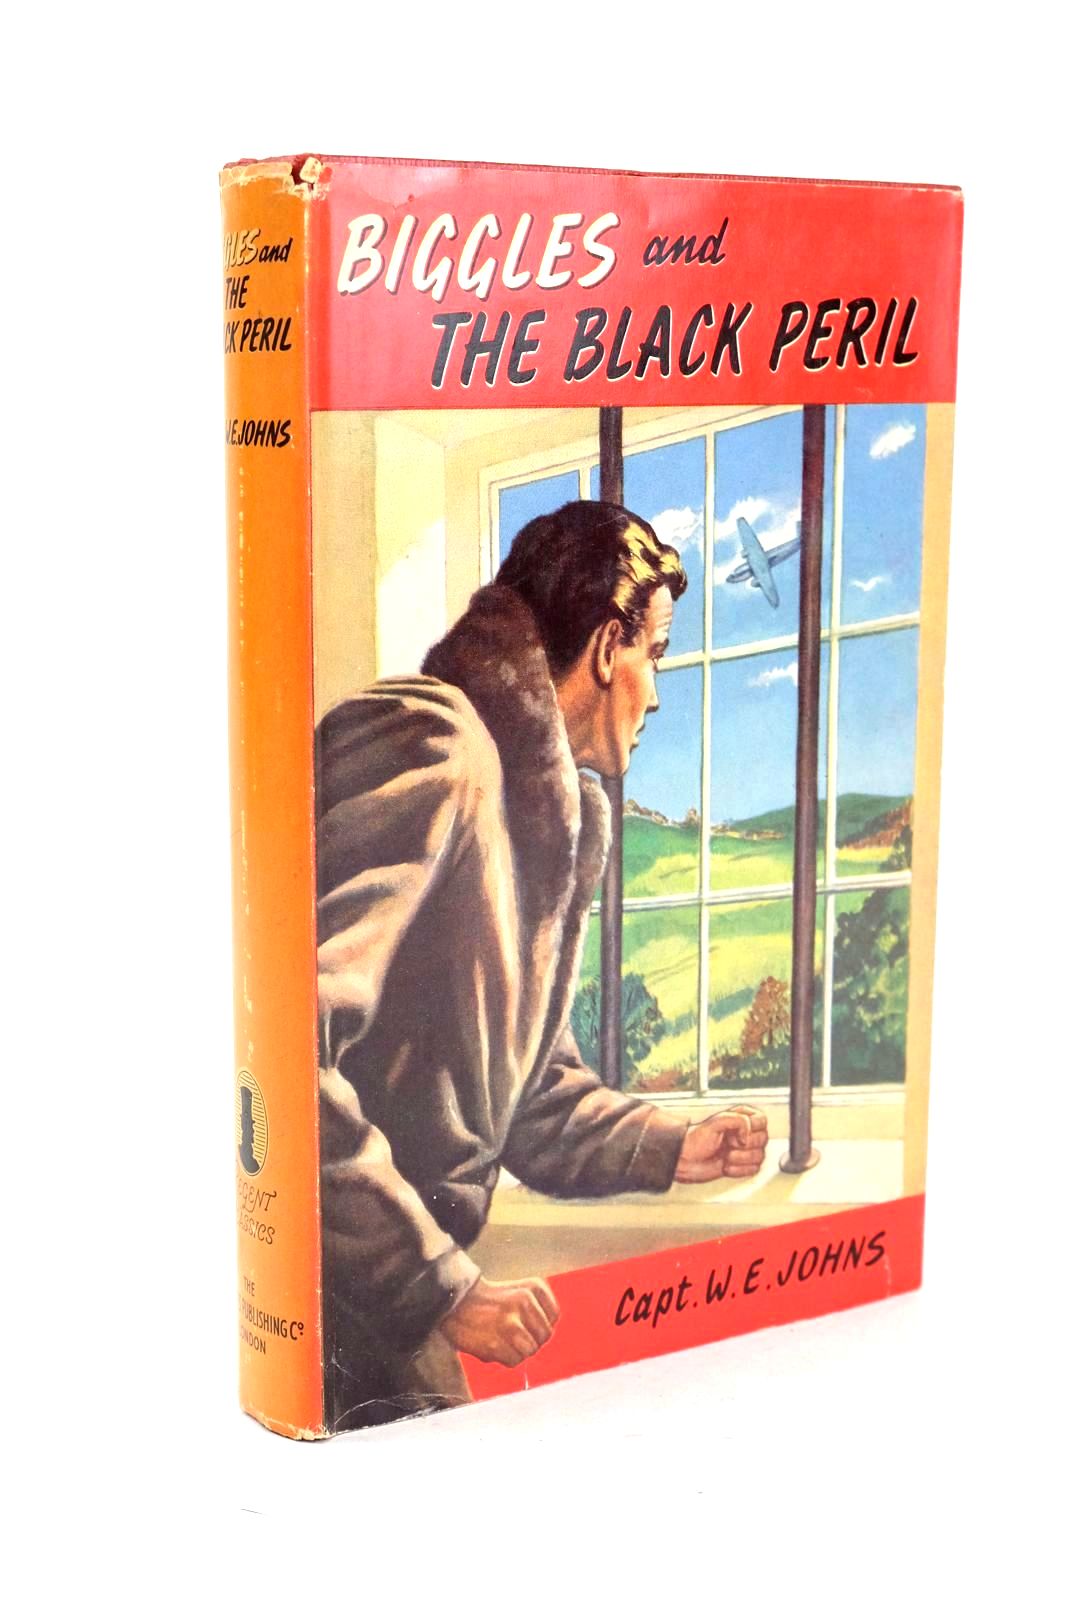 Photo of BIGGLES AND THE BLACK PERIL written by Johns, W.E. published by The Thames Publishing Co. (STOCK CODE: 1326370)  for sale by Stella & Rose's Books